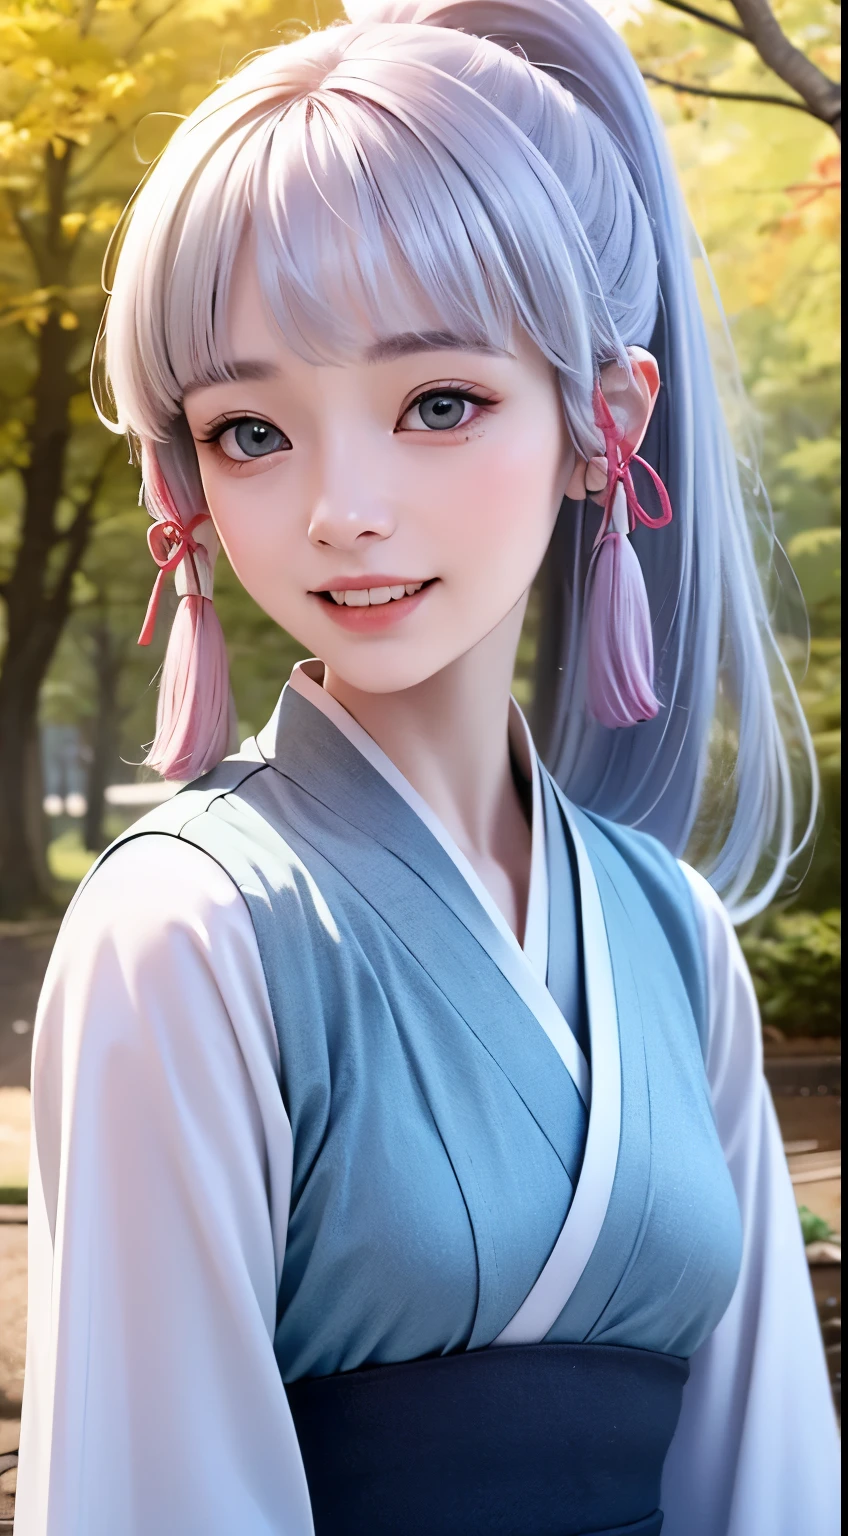 Best quality，tmasterpiece，Extremely Delicately Beautiful，The content is very detailed，CG，gatherings，8k wallpaper，An Astonishing，depth of fields，1 little Chinese girl，Wearing Chinese Hanfu，Playing in the maple forest，Red maple leaves fall，7 year old Chinese ，Very cute look，Innocent，delicate skin，Flawless Face，plain face，White hair，medium length white hair，high ponytails，There are two strands of white hair on both sides of the ears，Wear pink hair accessories，The color of the eyes is blue，Elaborate Eyes，sparkle in eyes，laughing very happily